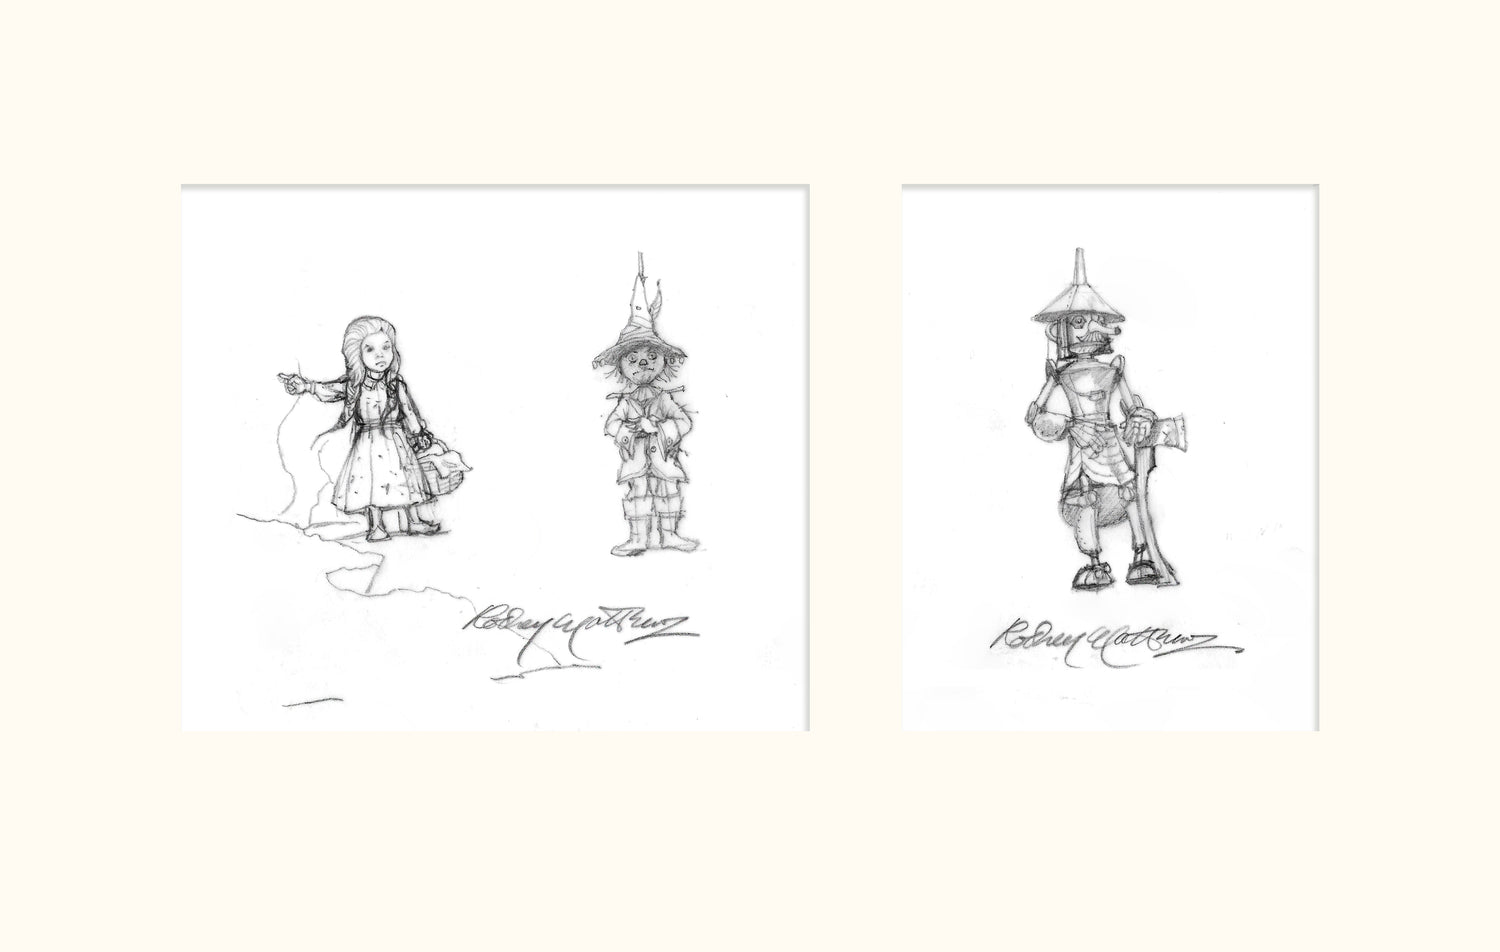 Details from LOTRTE (Magnum) - Dorothy, Scarecrow and Tinman original pencil sketches by Rodney Matthews